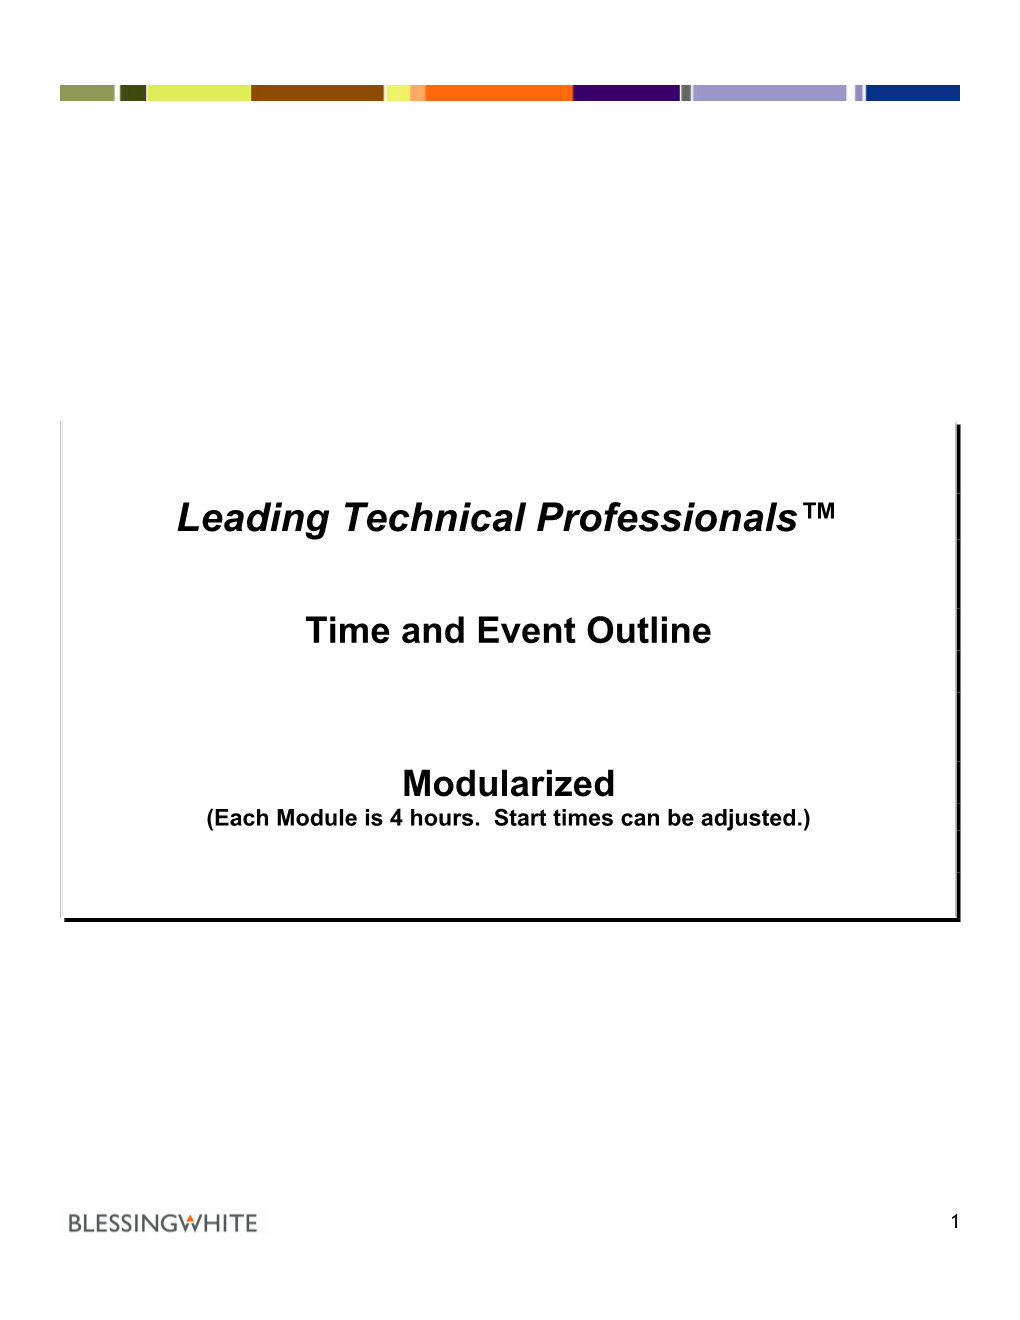 Leading Technical Professionals